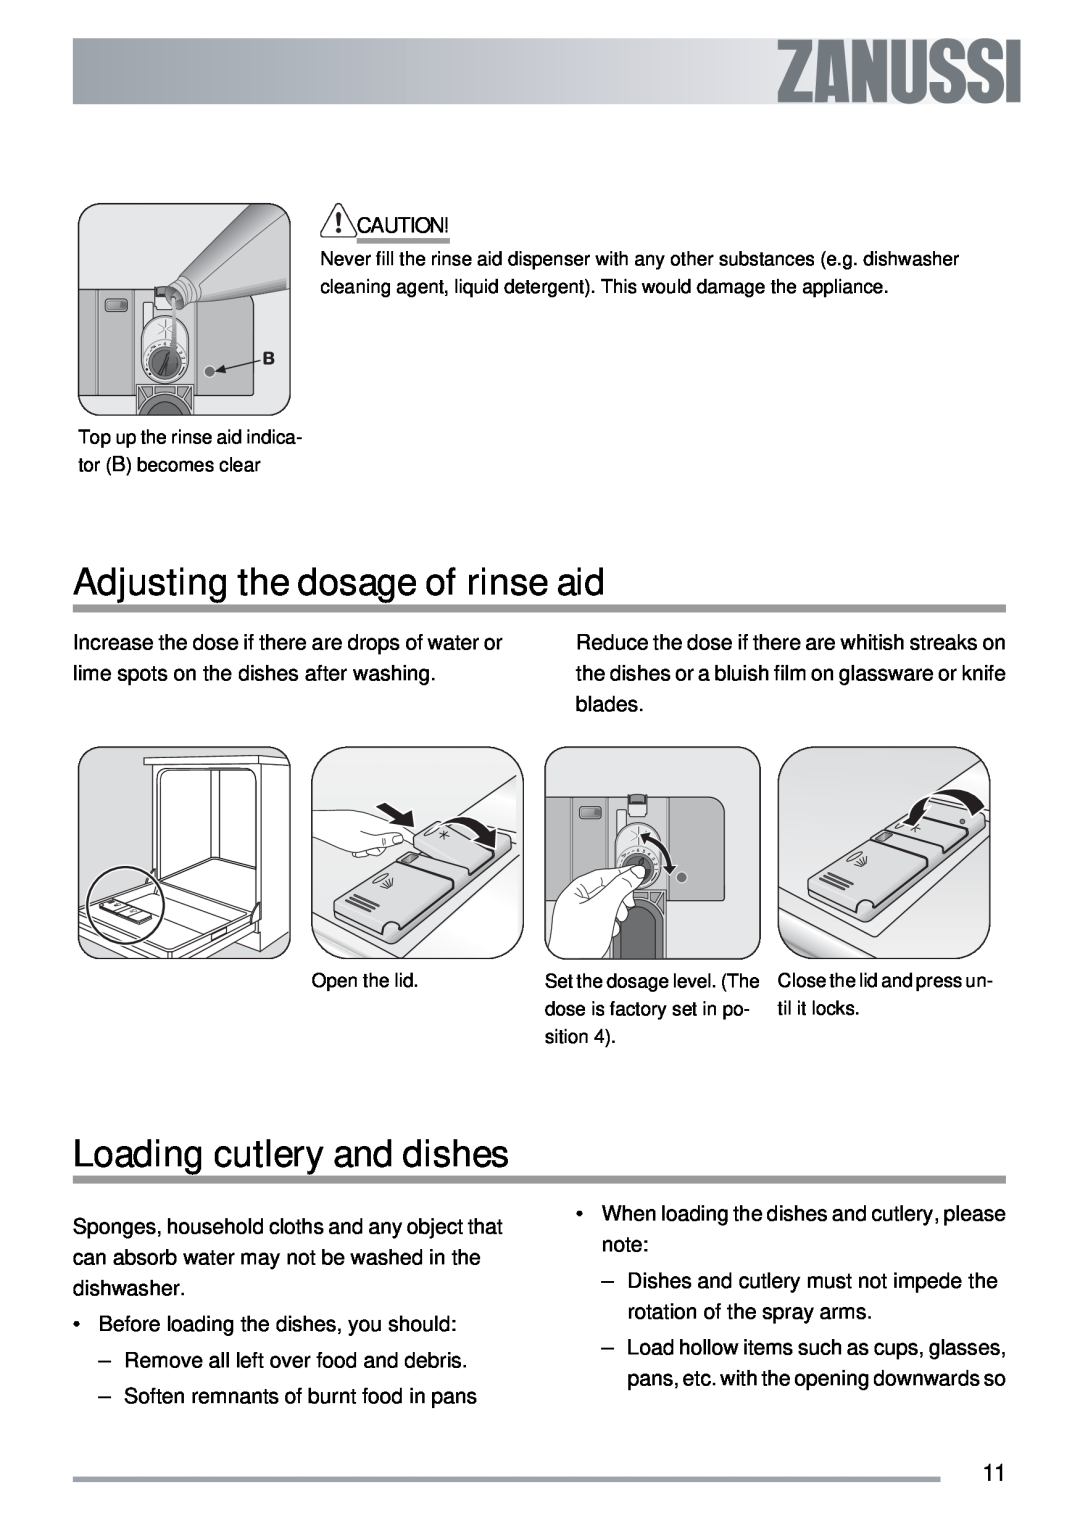 Zanussi ZDI 122 user manual Adjusting the dosage of rinse aid, Loading cutlery and dishes 